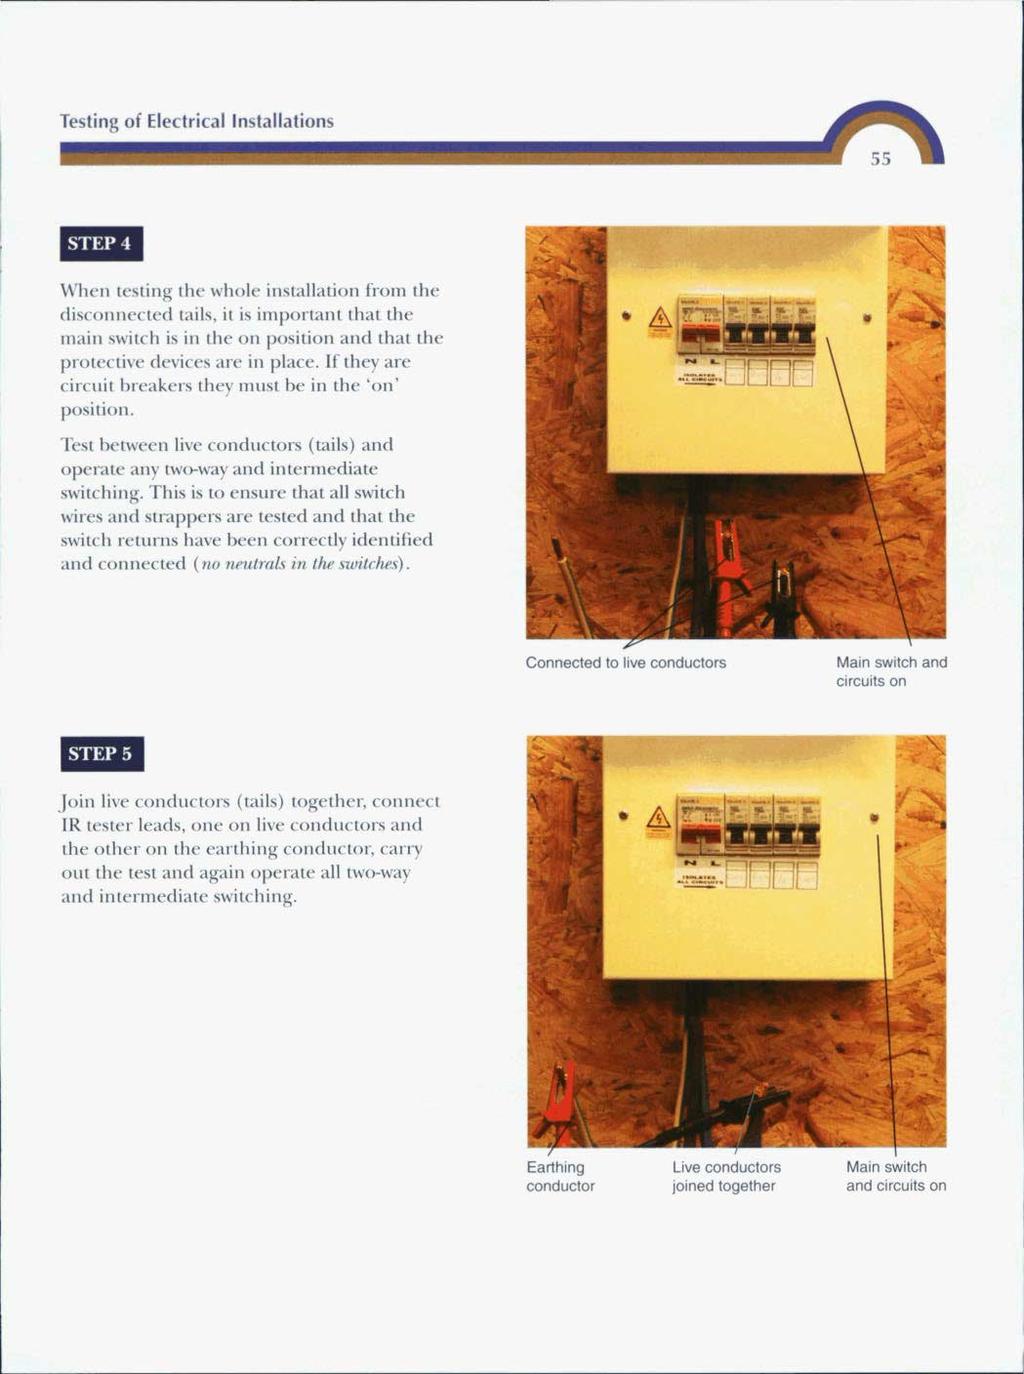 Testing of Electrical Installations When testing the whole installation from the disconnected tails, it is important that the main switch is in the on position and that the protective devices are in